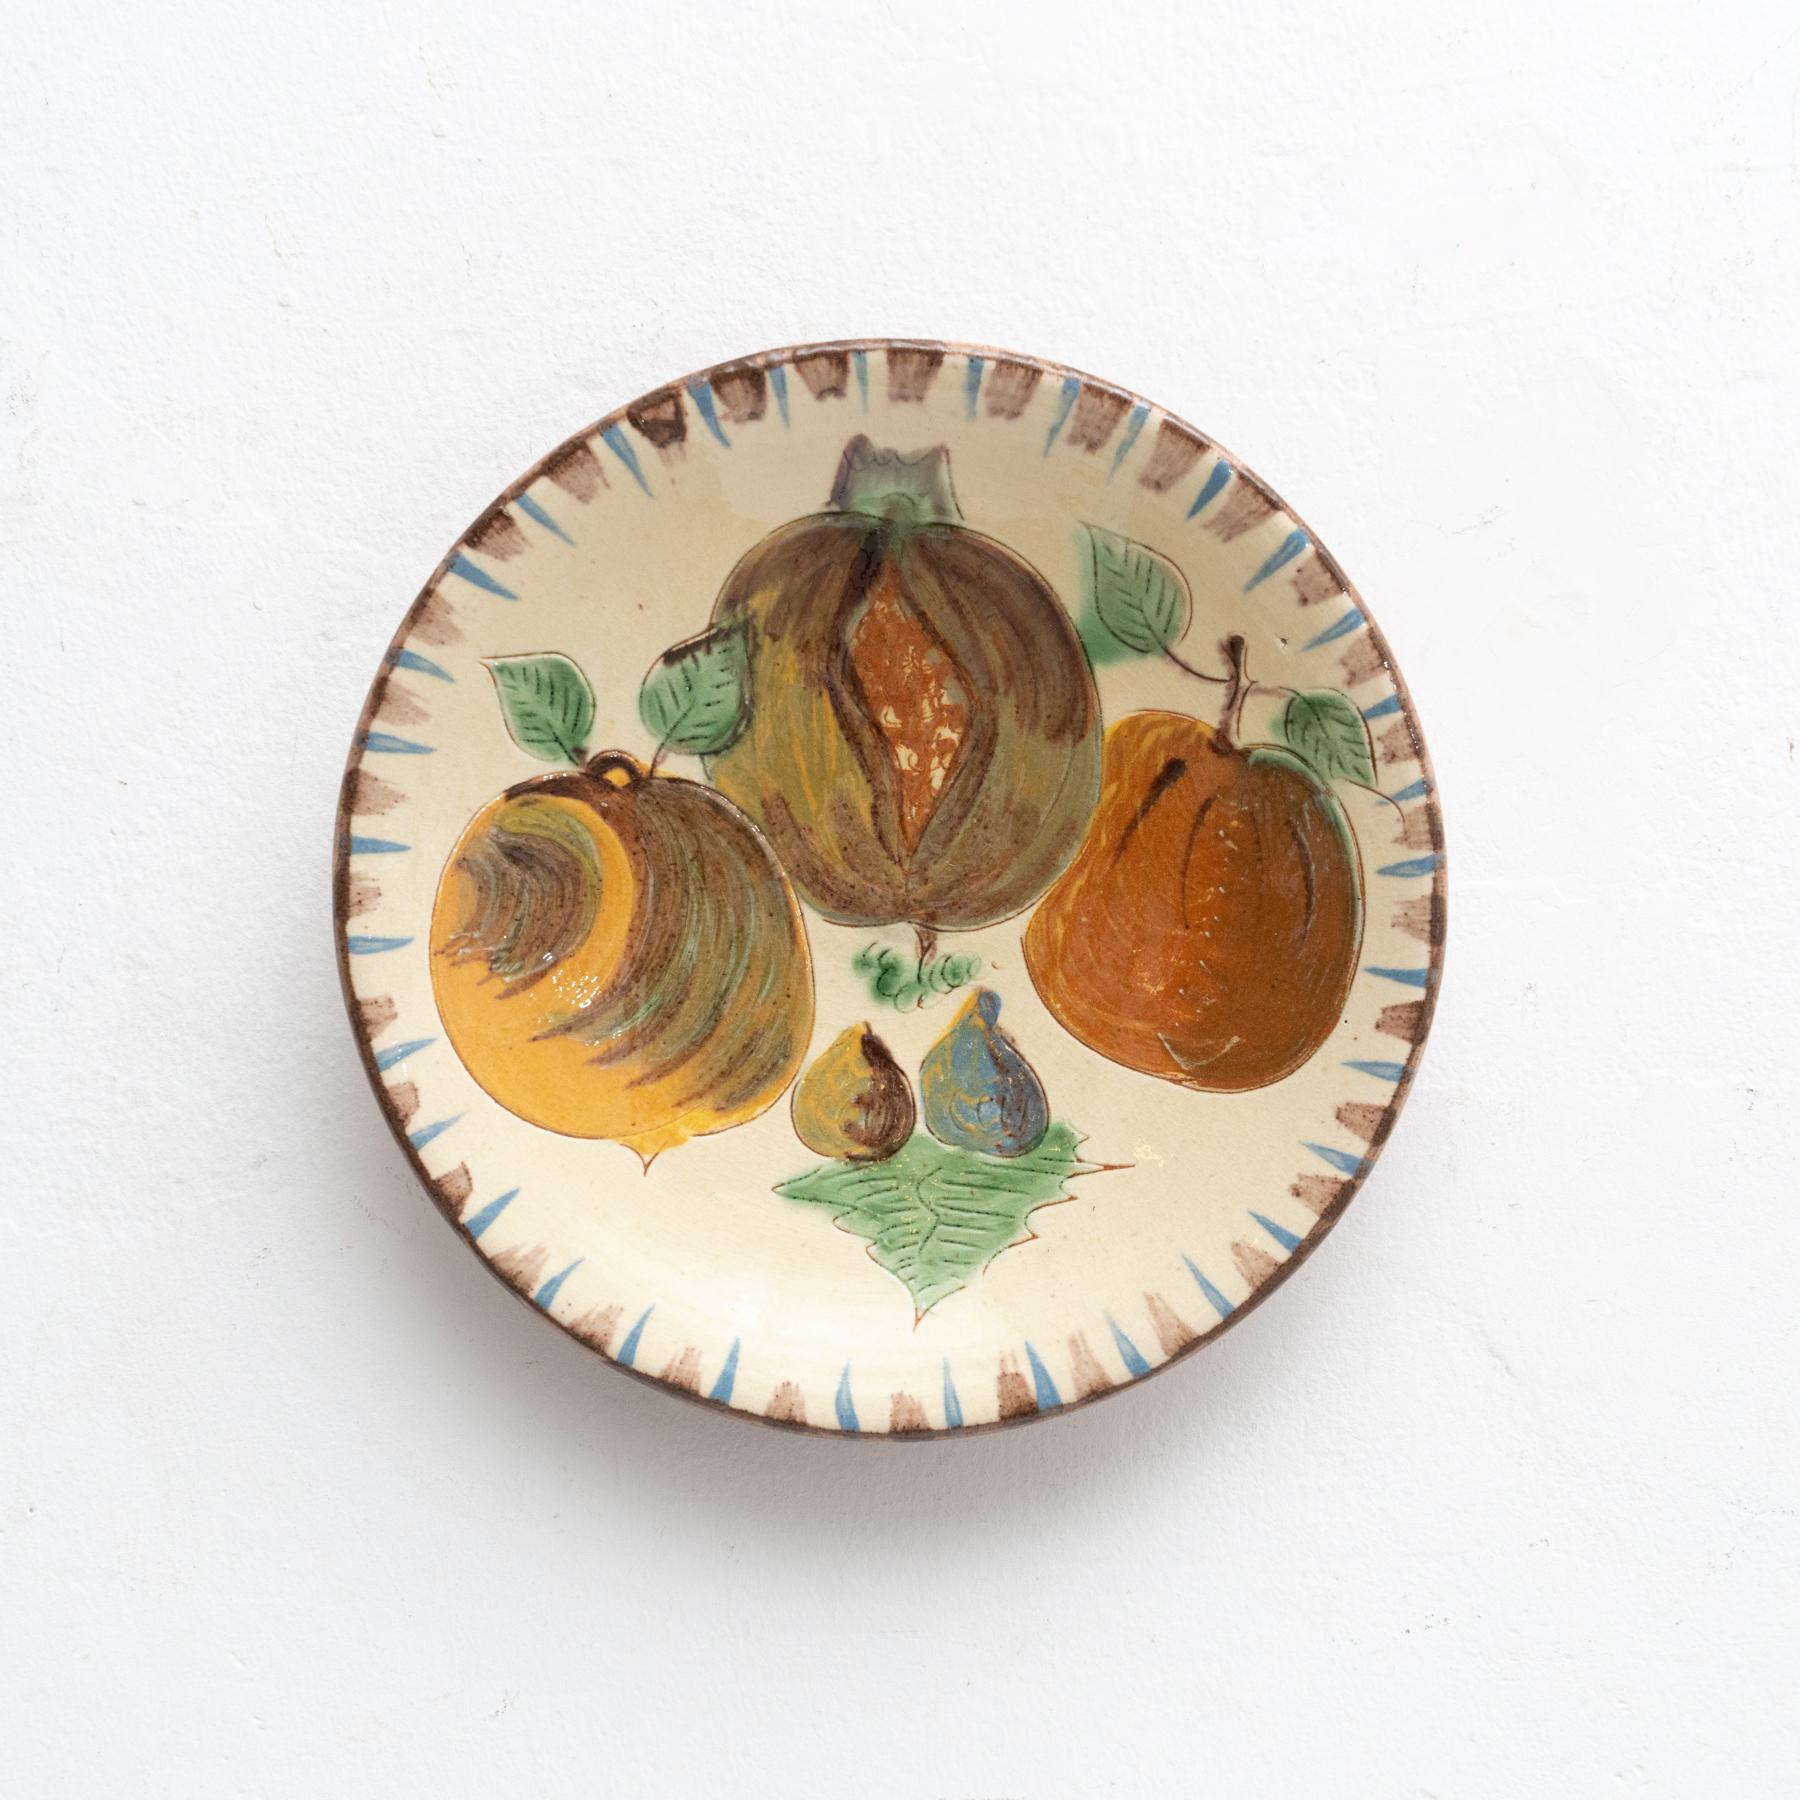 Ceramic decorative hand painted plate artwork.

Manufactured by Catalan artist Puigdemont, circa 1960.

In original condition, with minor wear consistent of age and use, preserving a beautiful patina.

Signed in the